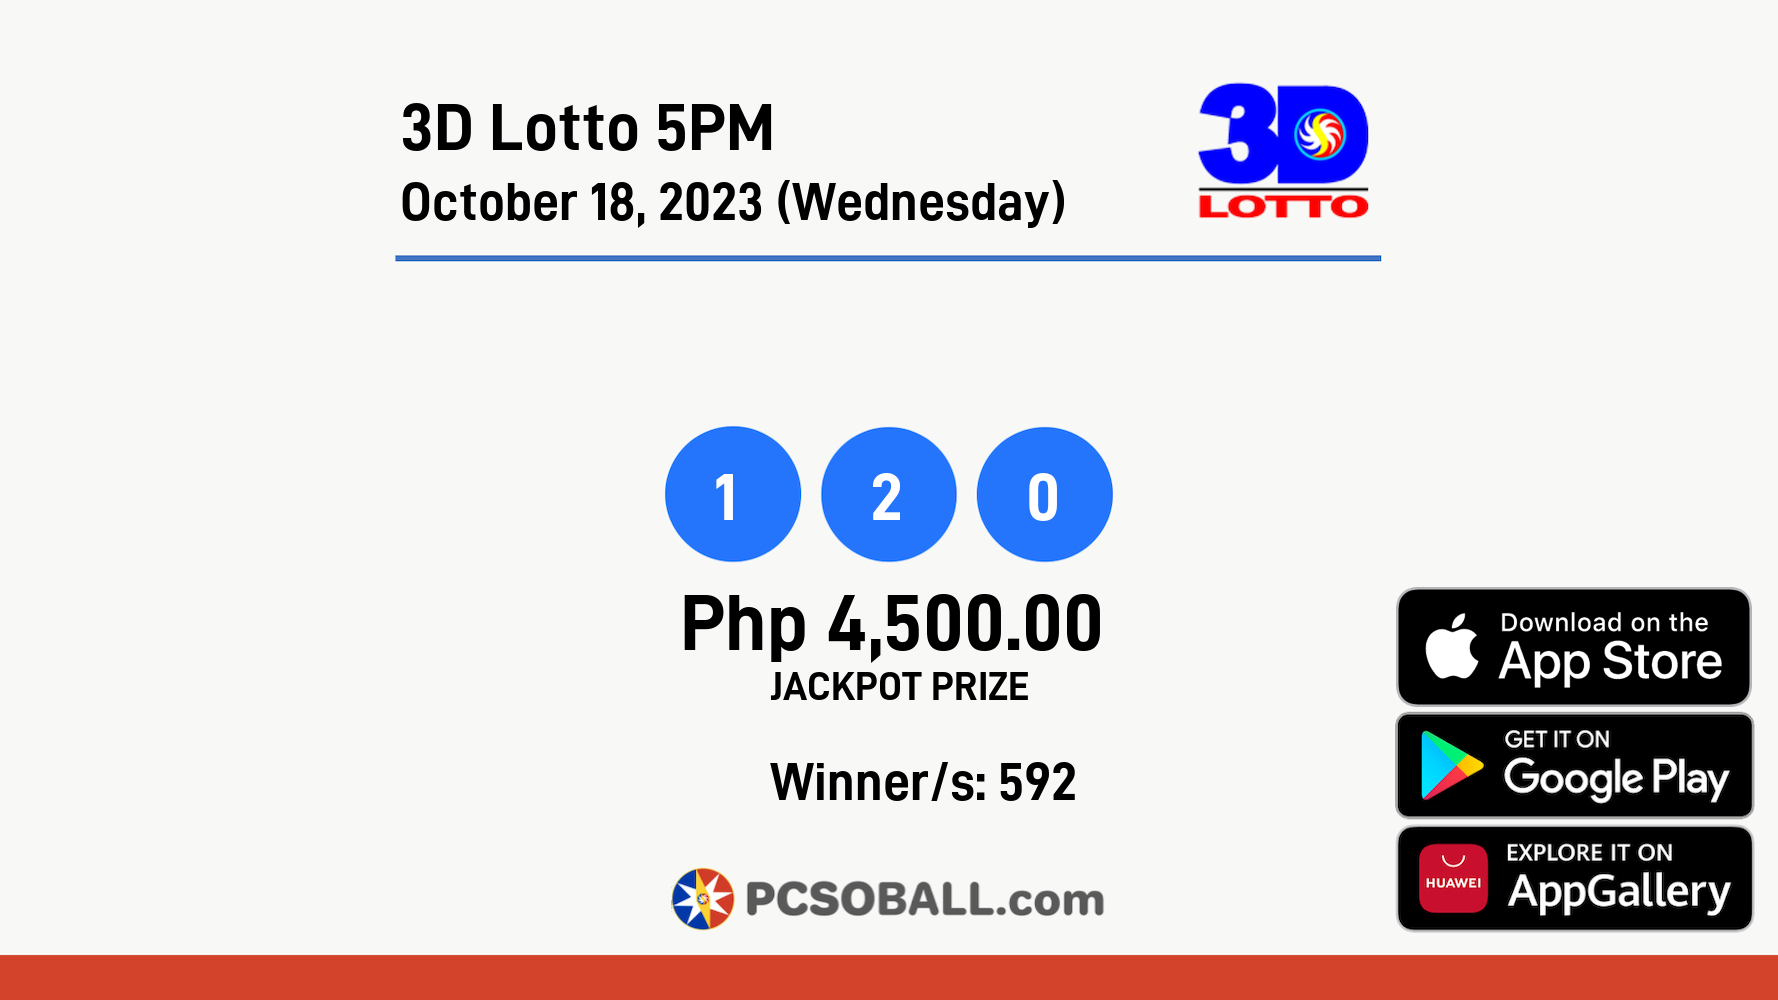 3D Lotto 5PM October 18, 2023 (Wednesday) Result